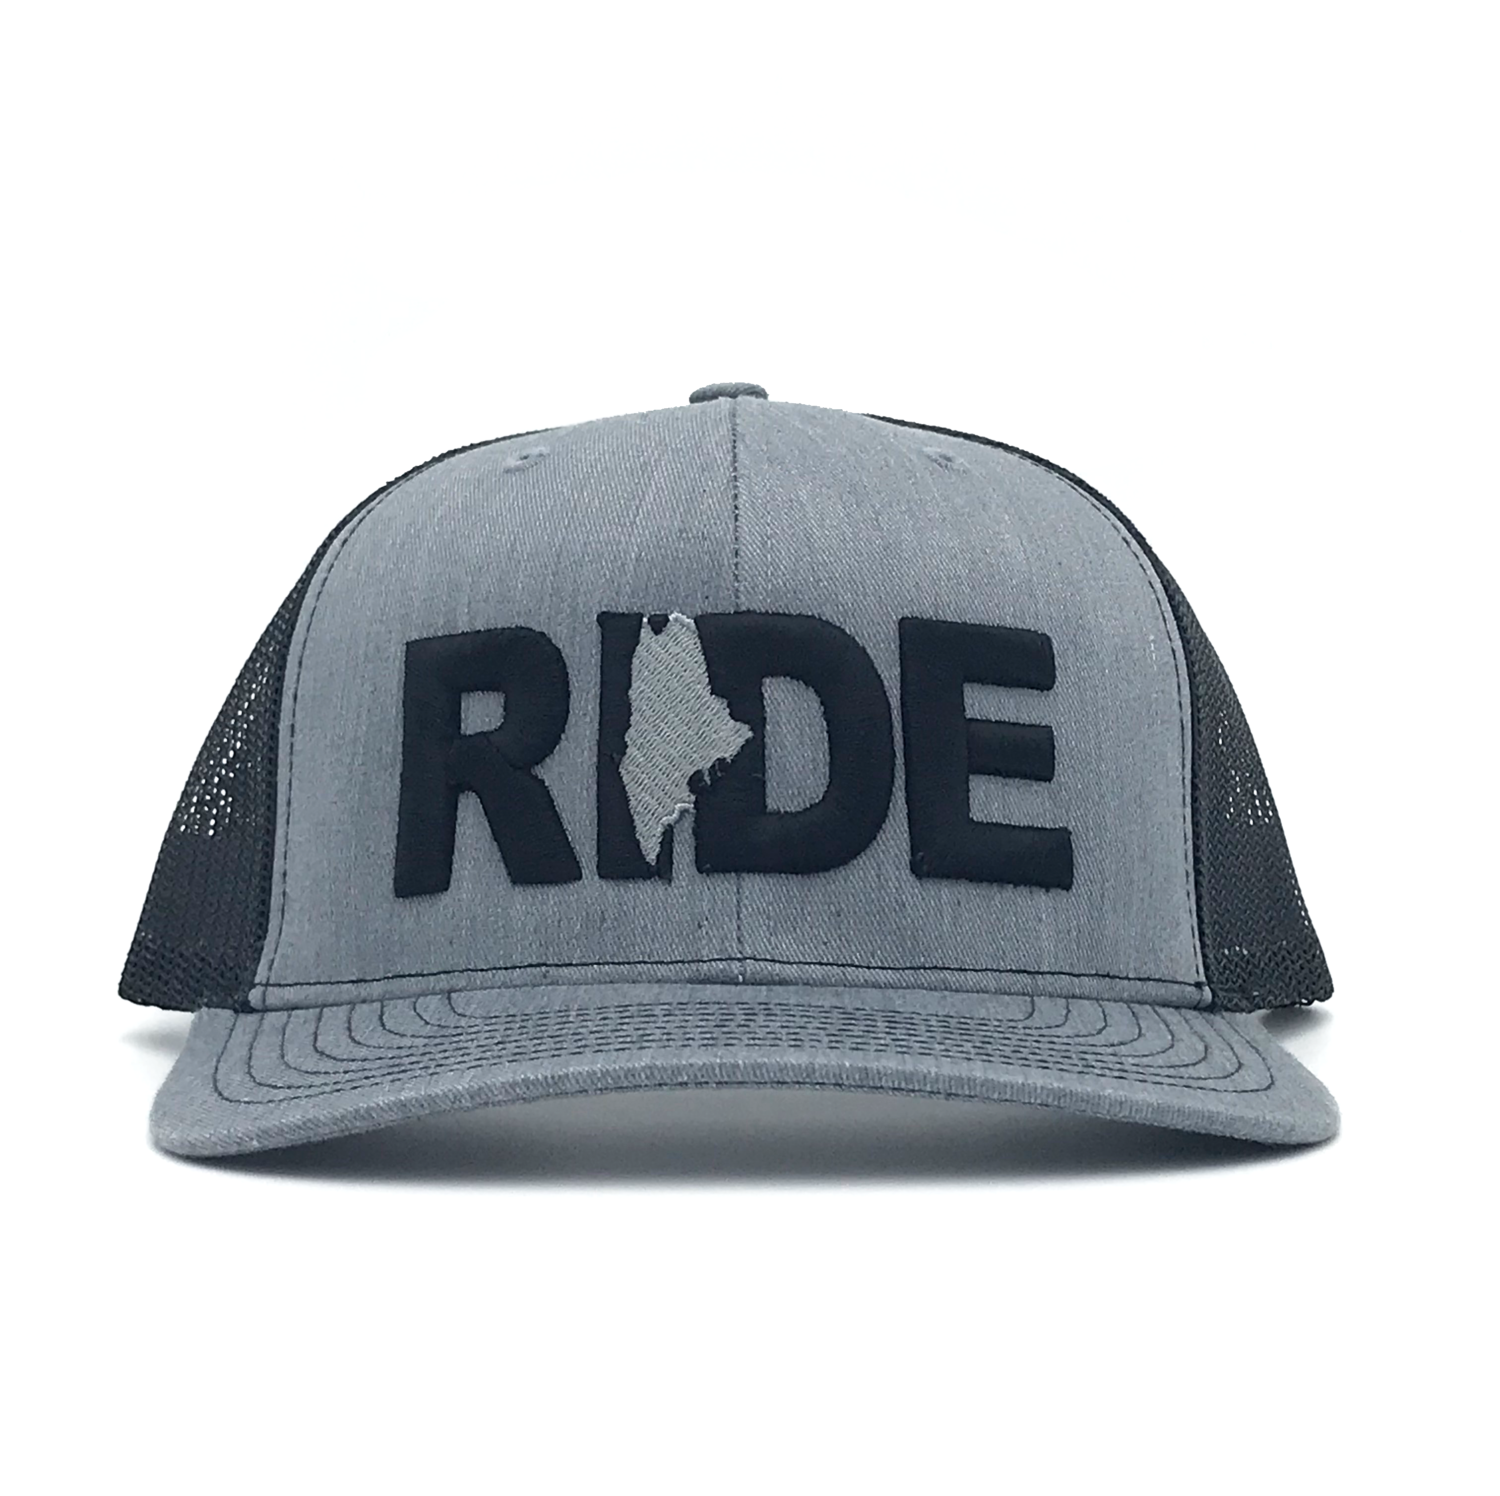 Ride Maine Classic Embroidered Snapback Trucker Hat Heather Gray/Black